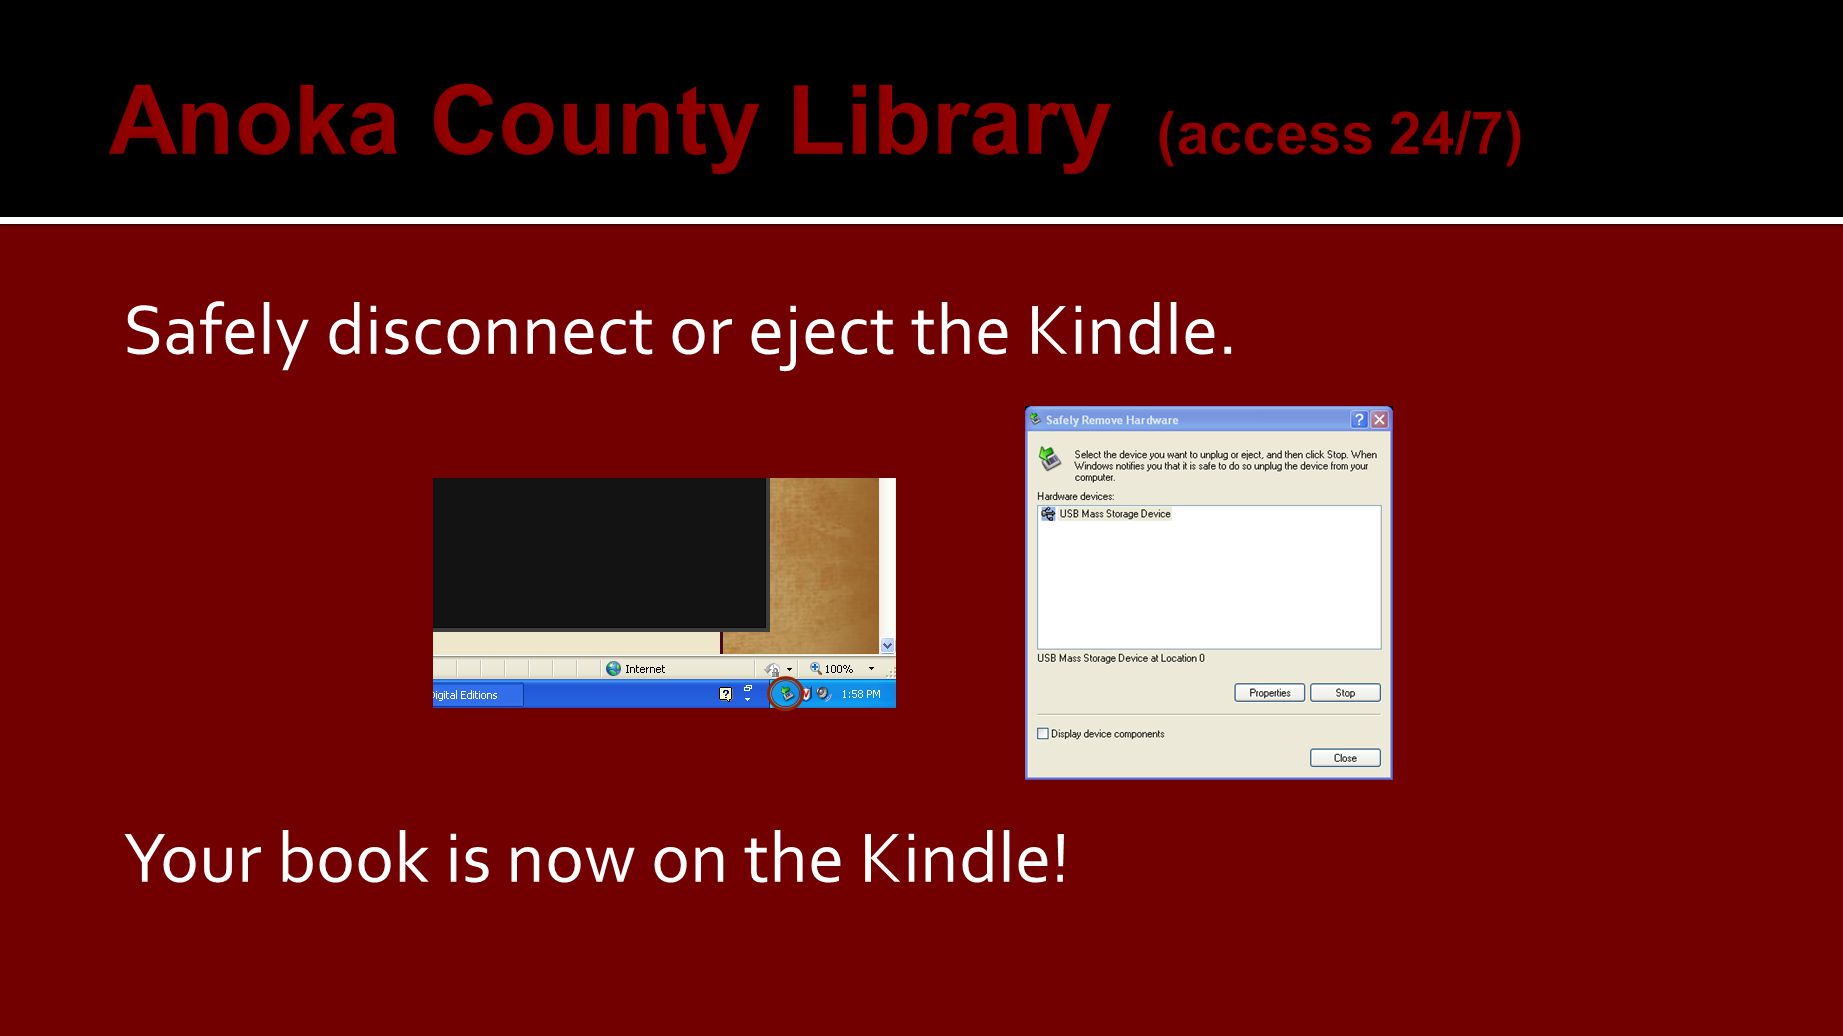 Safely disconnect or eject the Kindle. Your book is now on the Kindle!